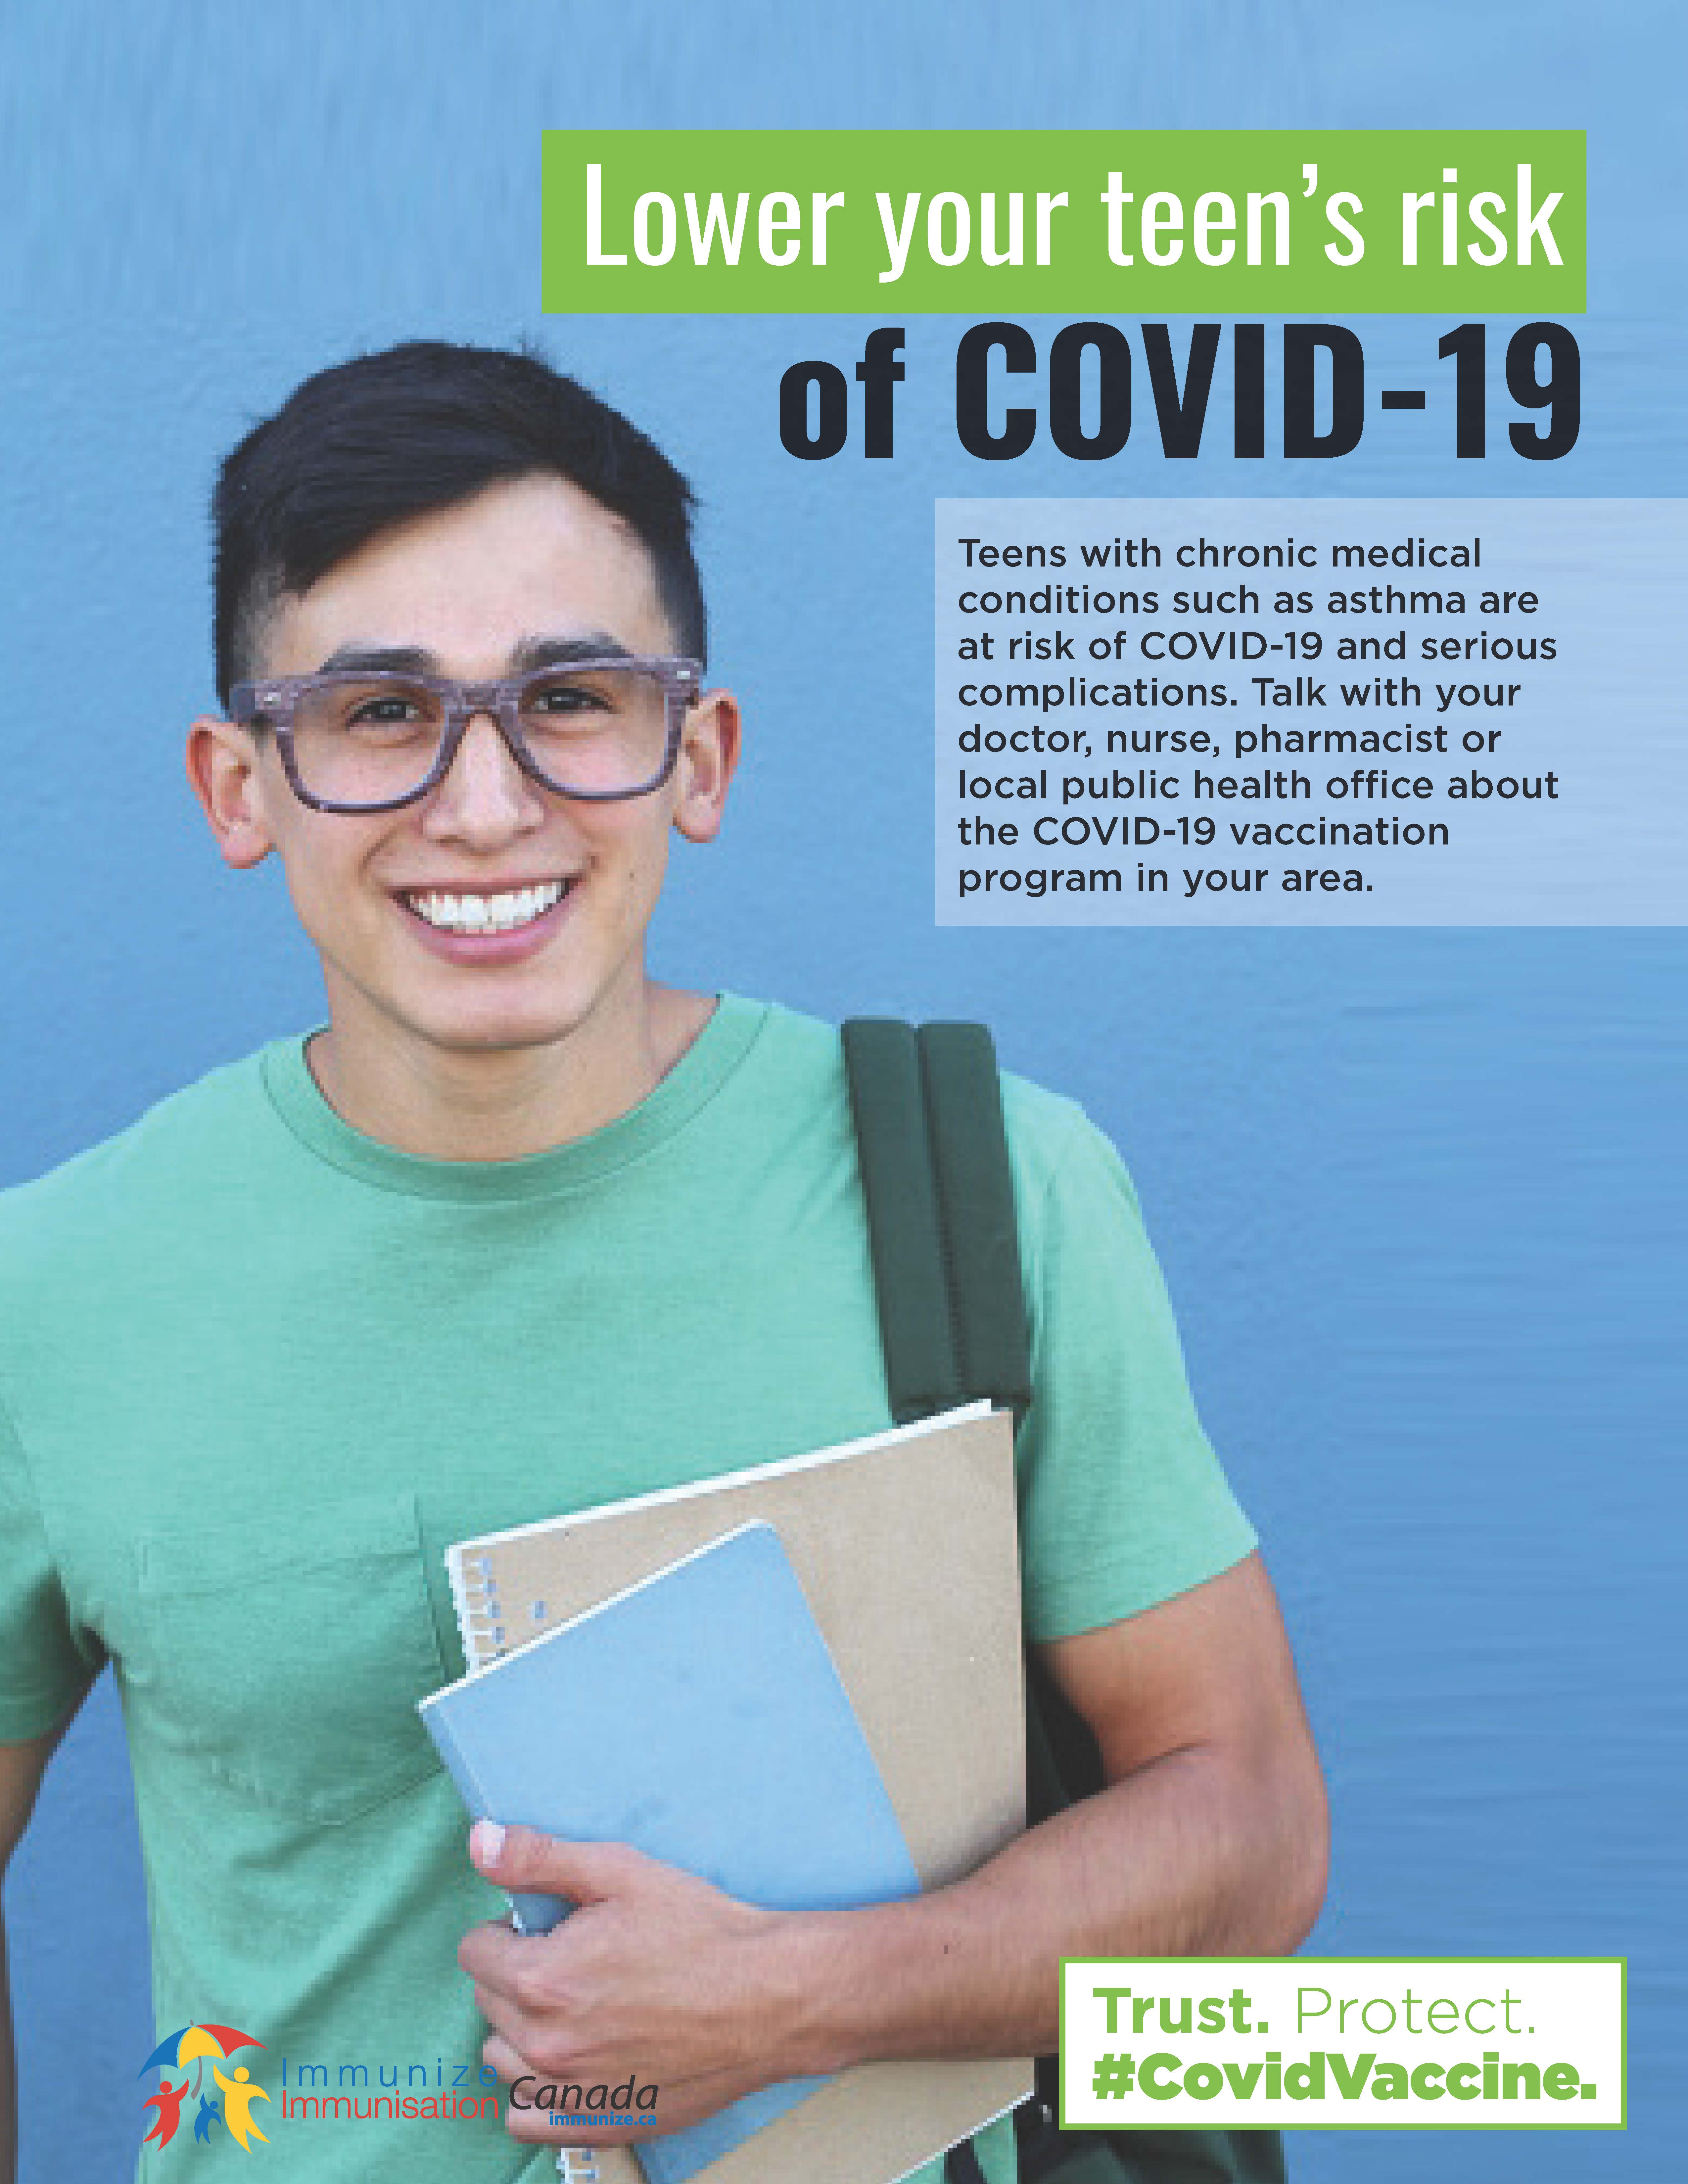 Lower your teen's risk of COVID-19